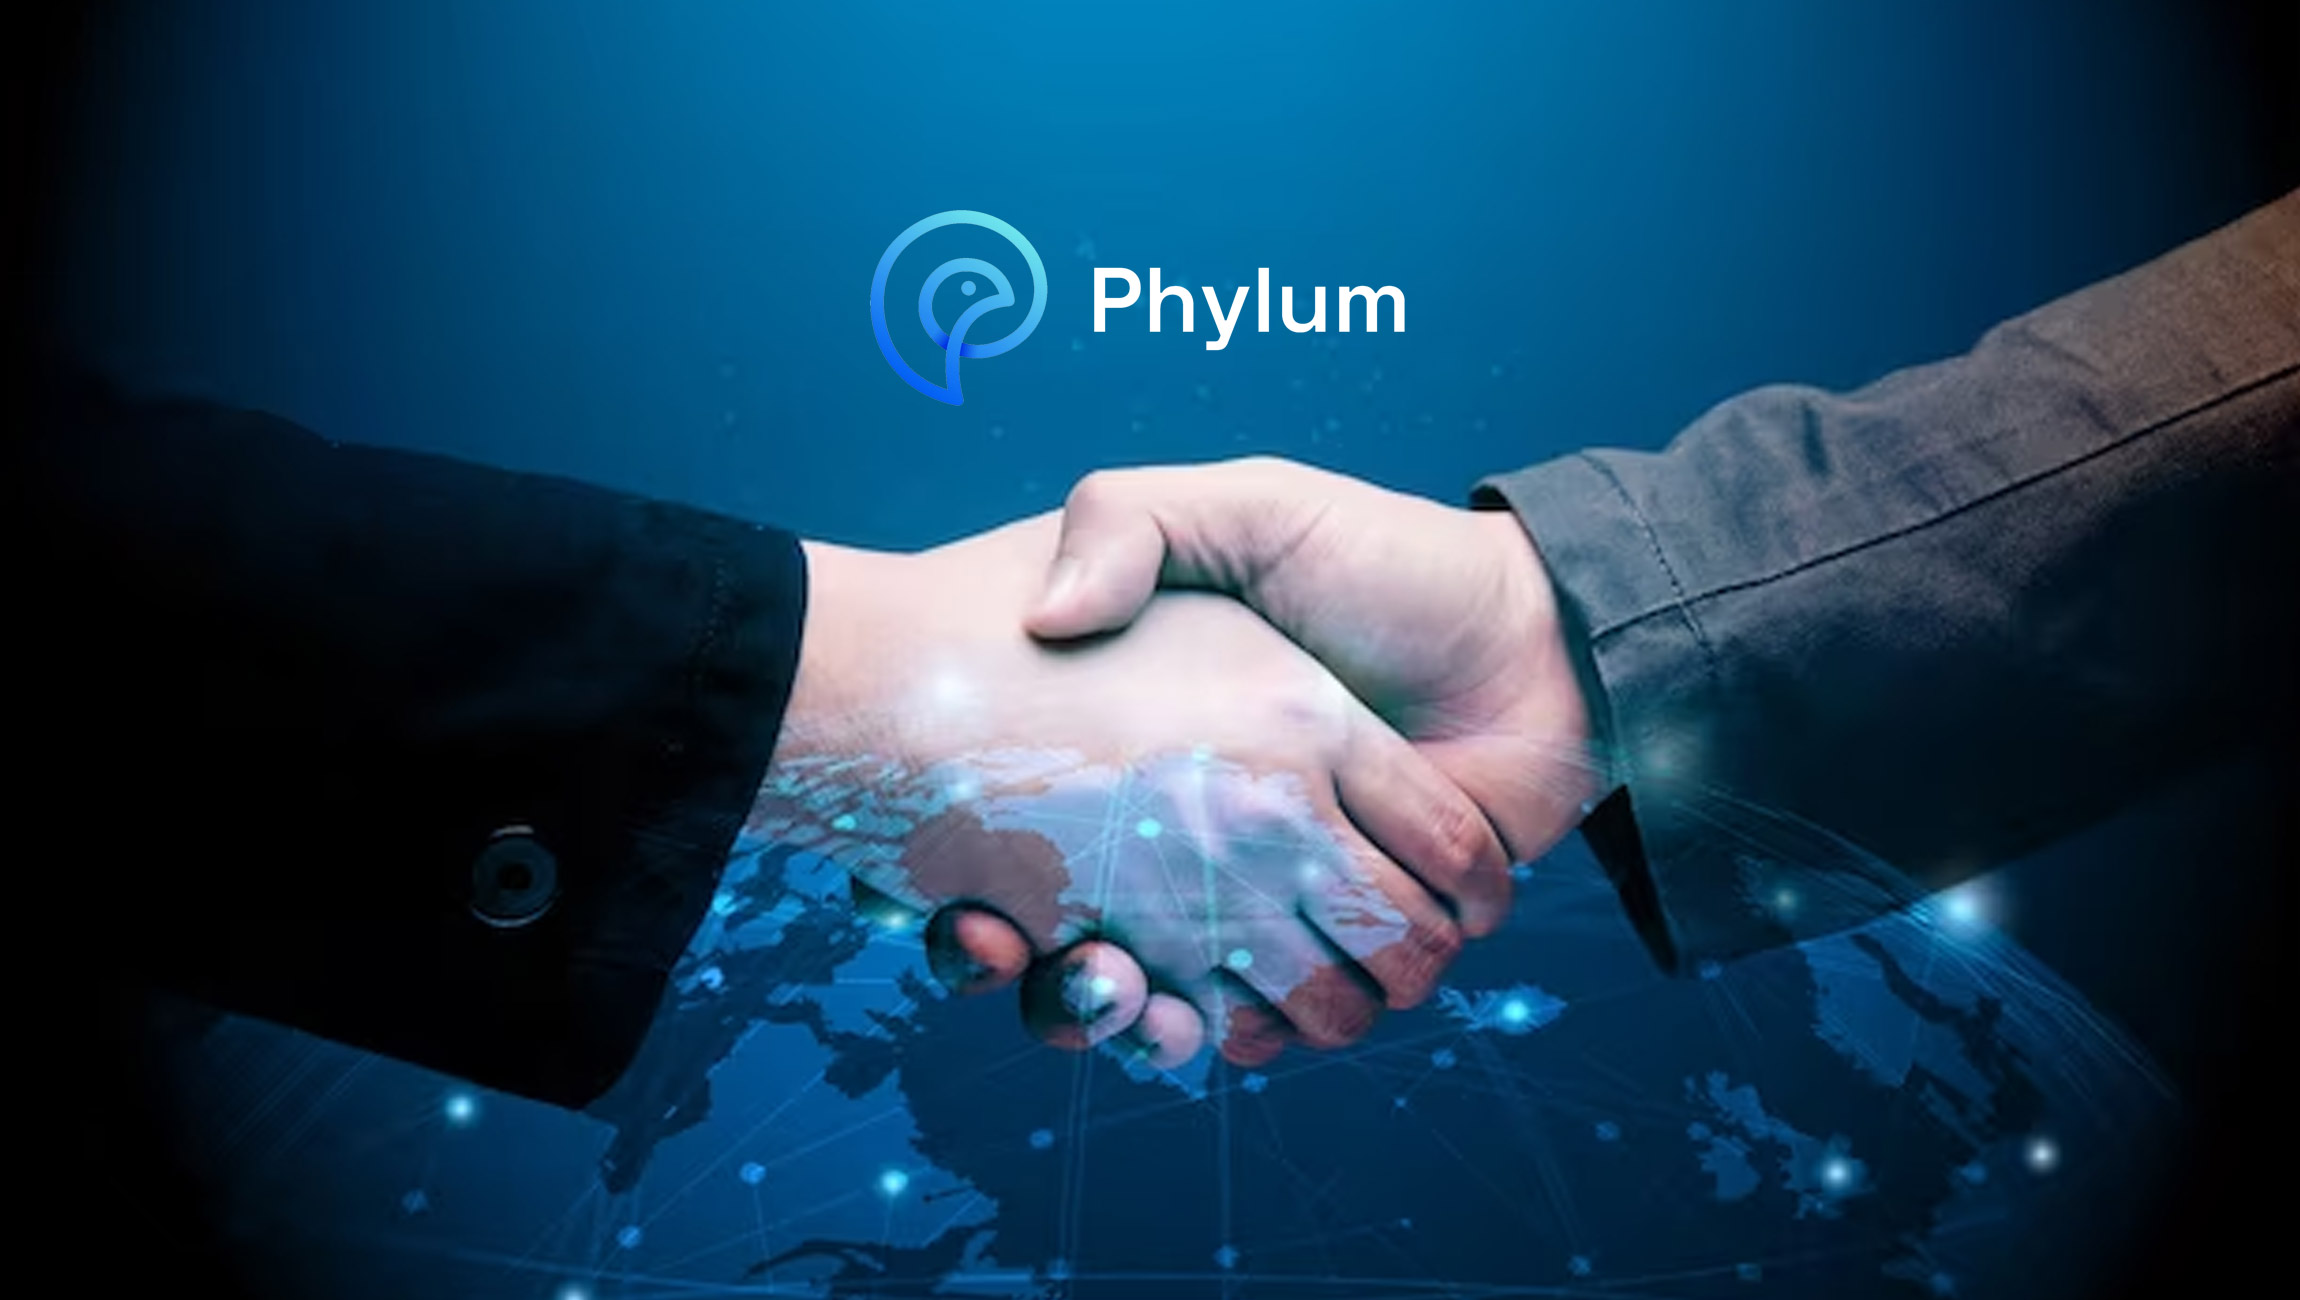 Phylum Launches Partner Program, Introduces Threat Feed of Malicious Open-Source Packages